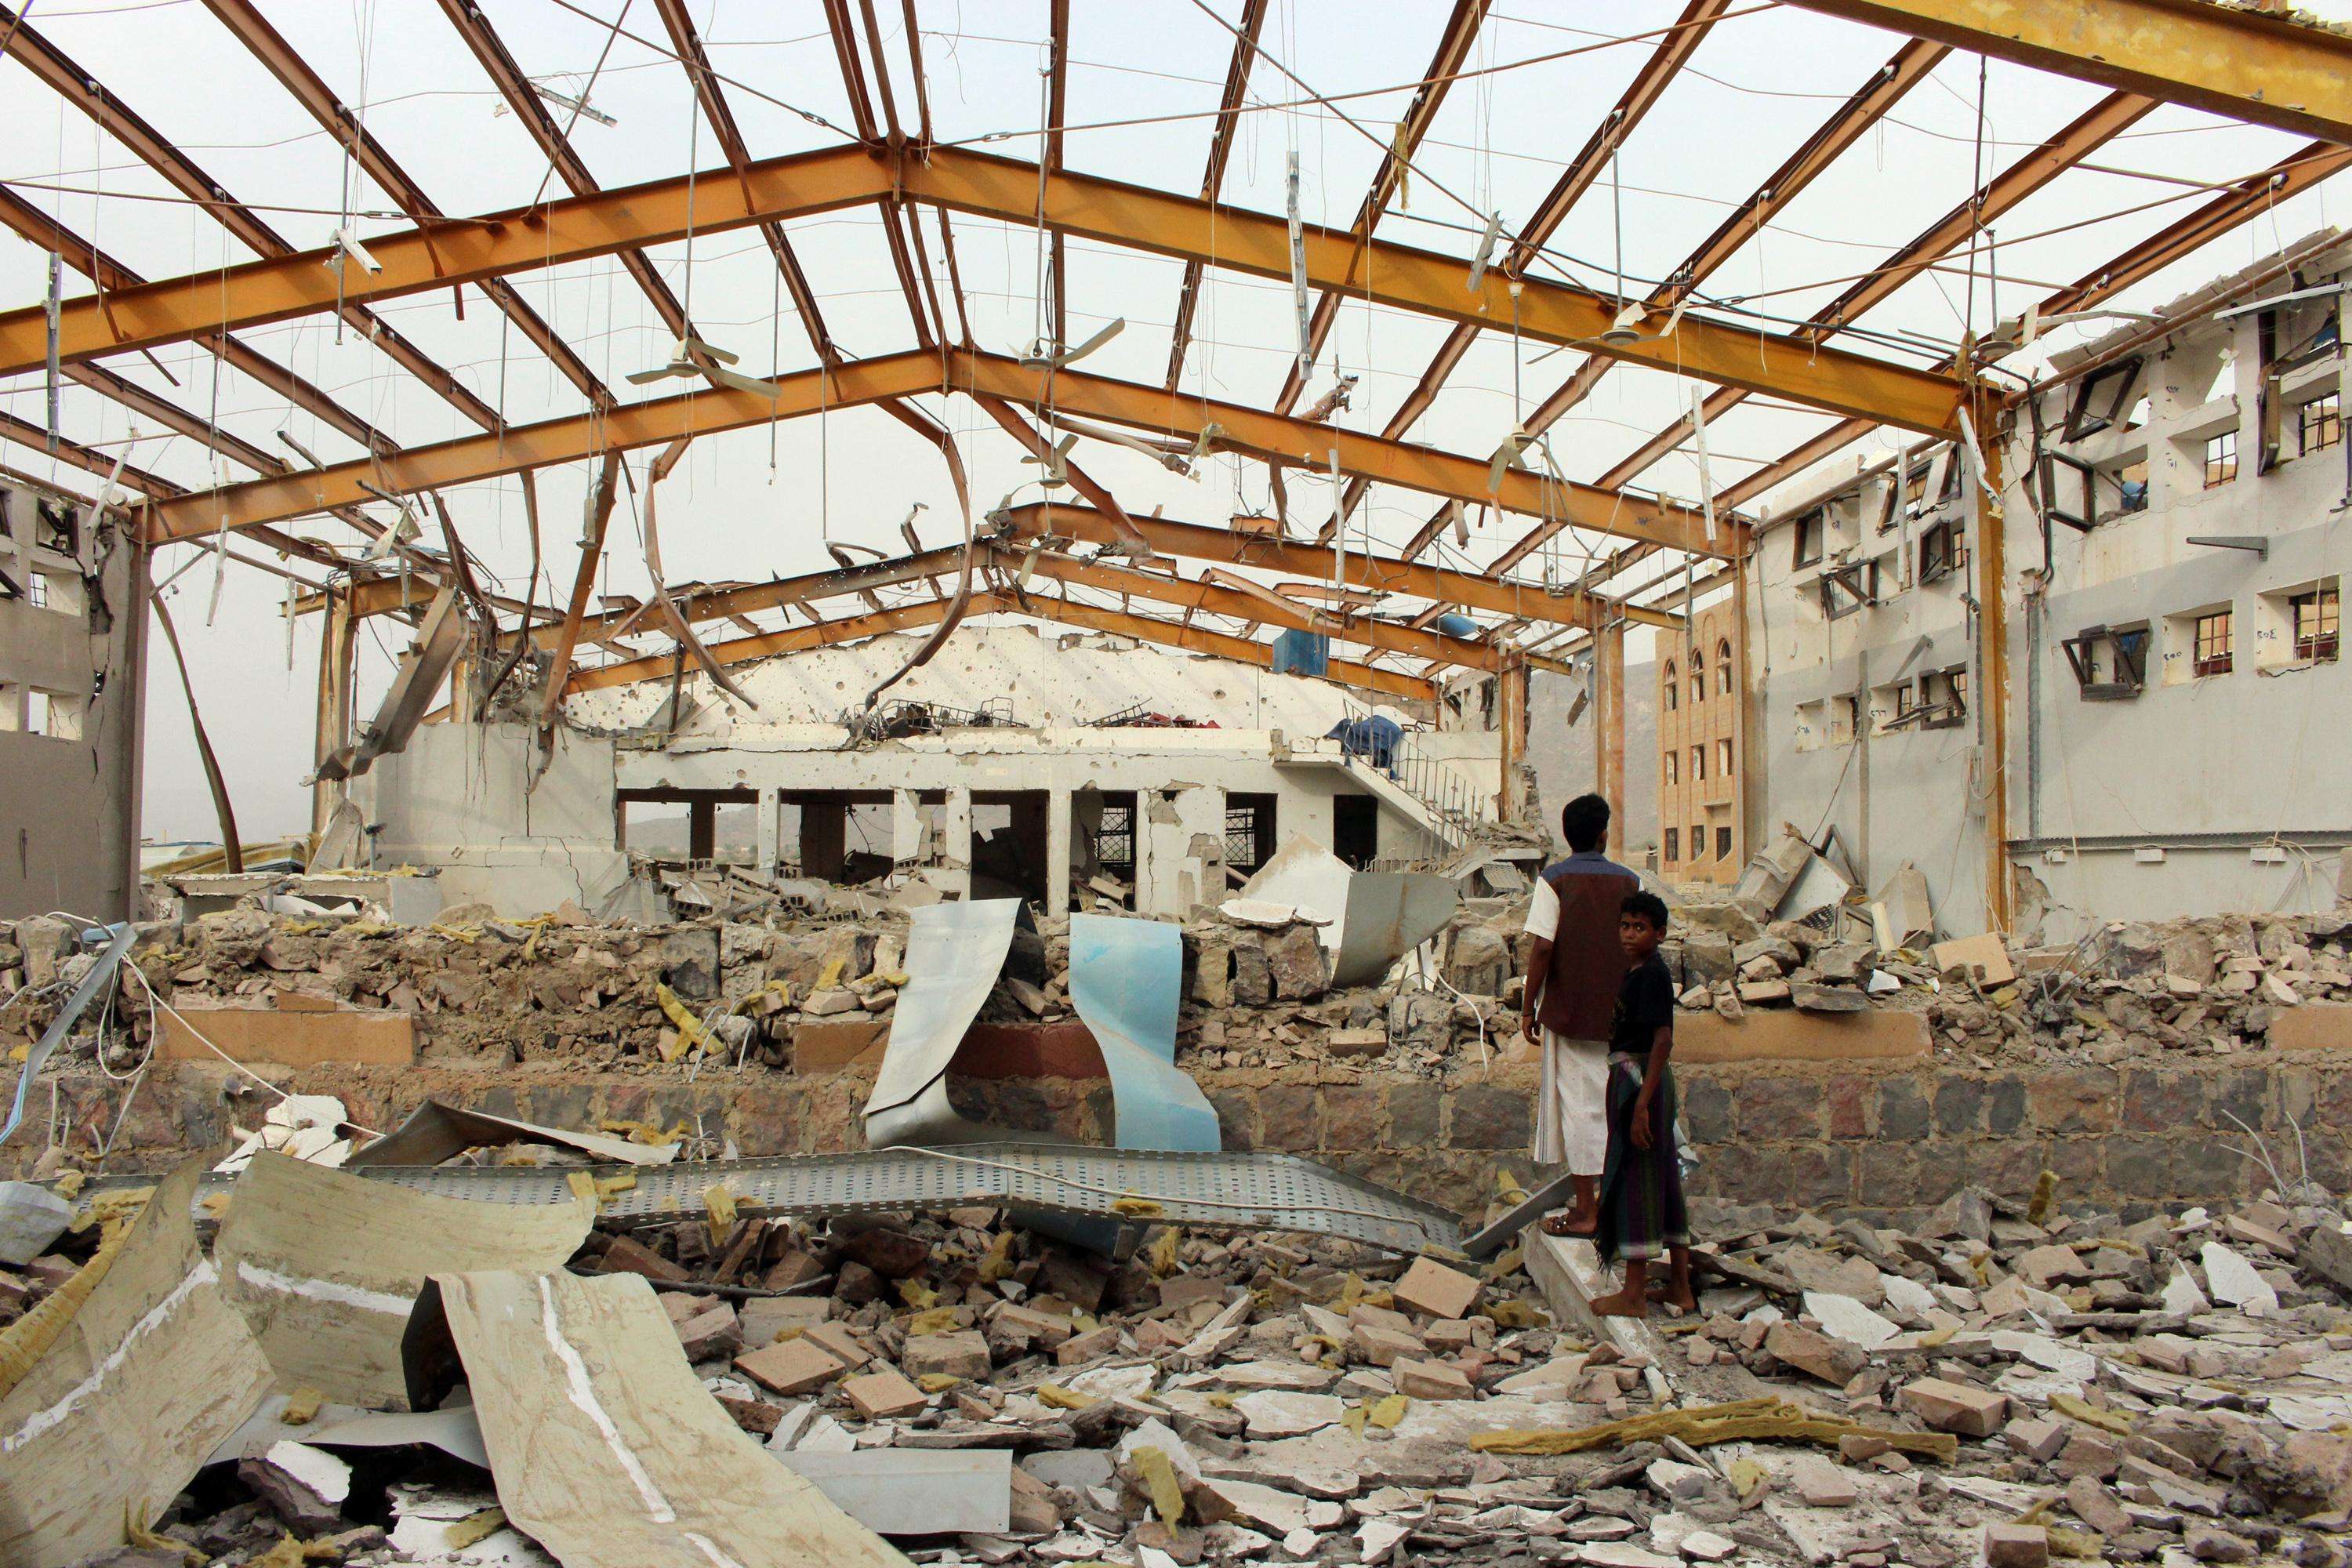 Yemenis survey the damage caused by a Saudi-led airstrike on an MSF-supported cholera treatment center in Yemen’s Abs region in June. No staff or patients were killed or injured in the attack.